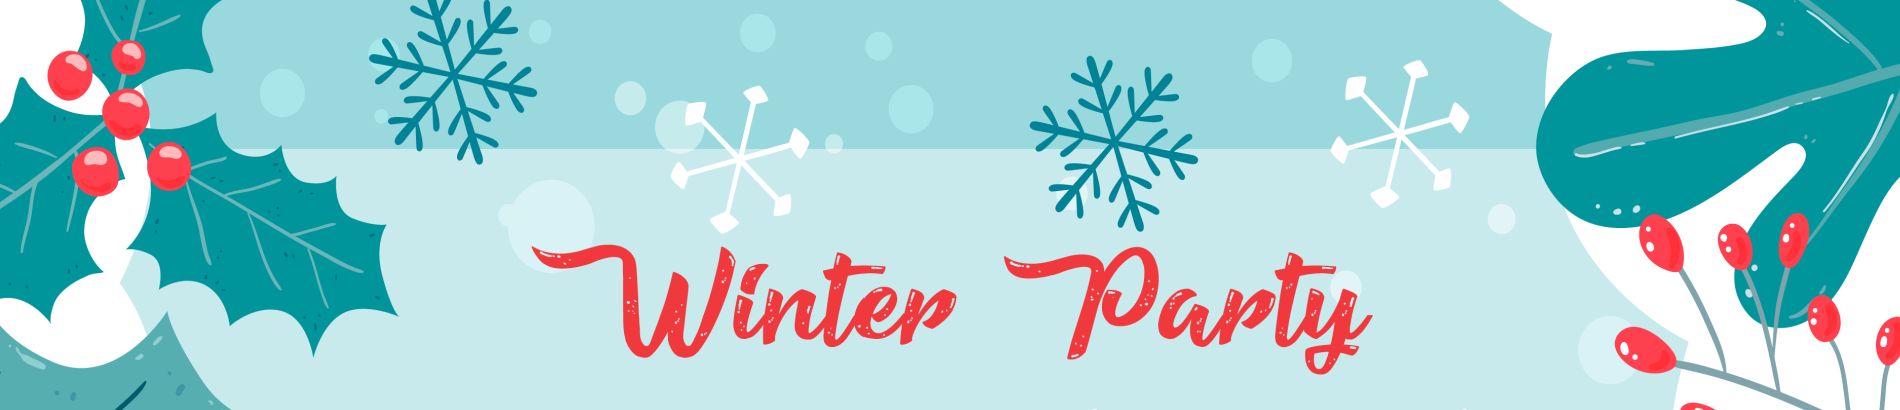 winterparty-web-banner.png